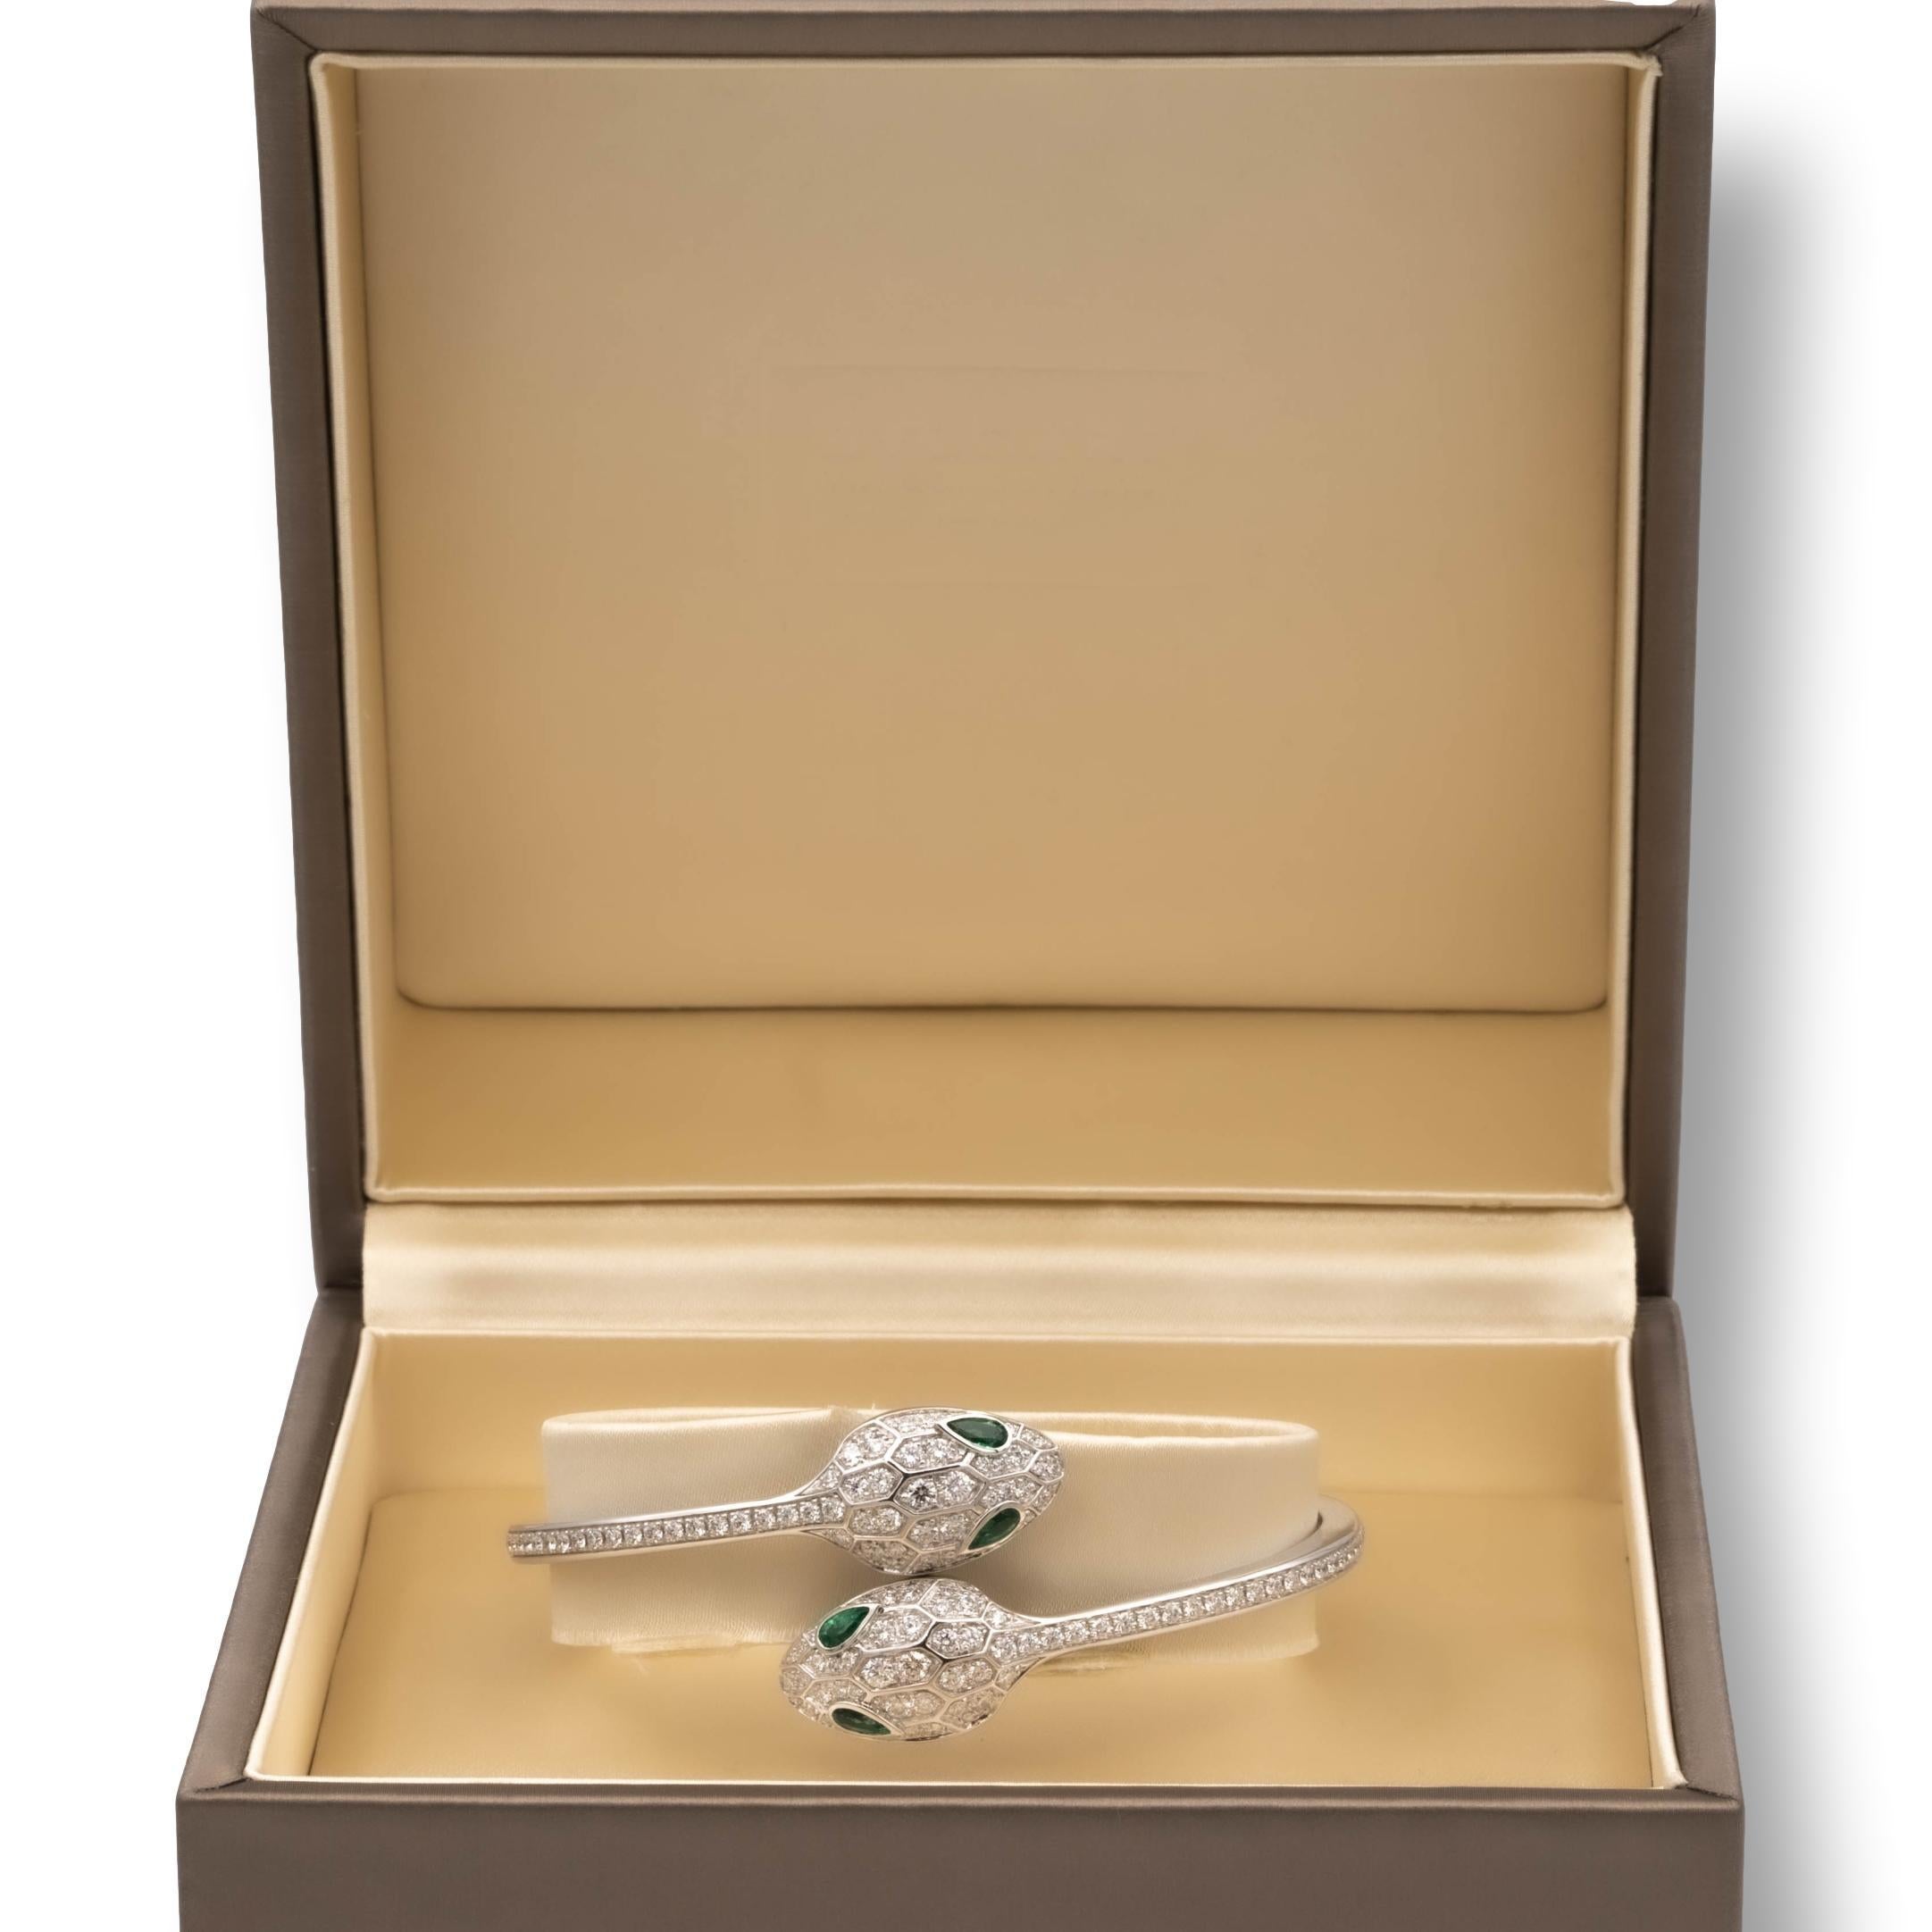 Bvlgari Serpenti bangle bracelet finely crafted in 18 karat white gold with pave set round brilliant cut diamonds weighing 1.66 carats total weight. Fine E-F color VVS clarity.
This iconic bracelet features a double face snake head on either side